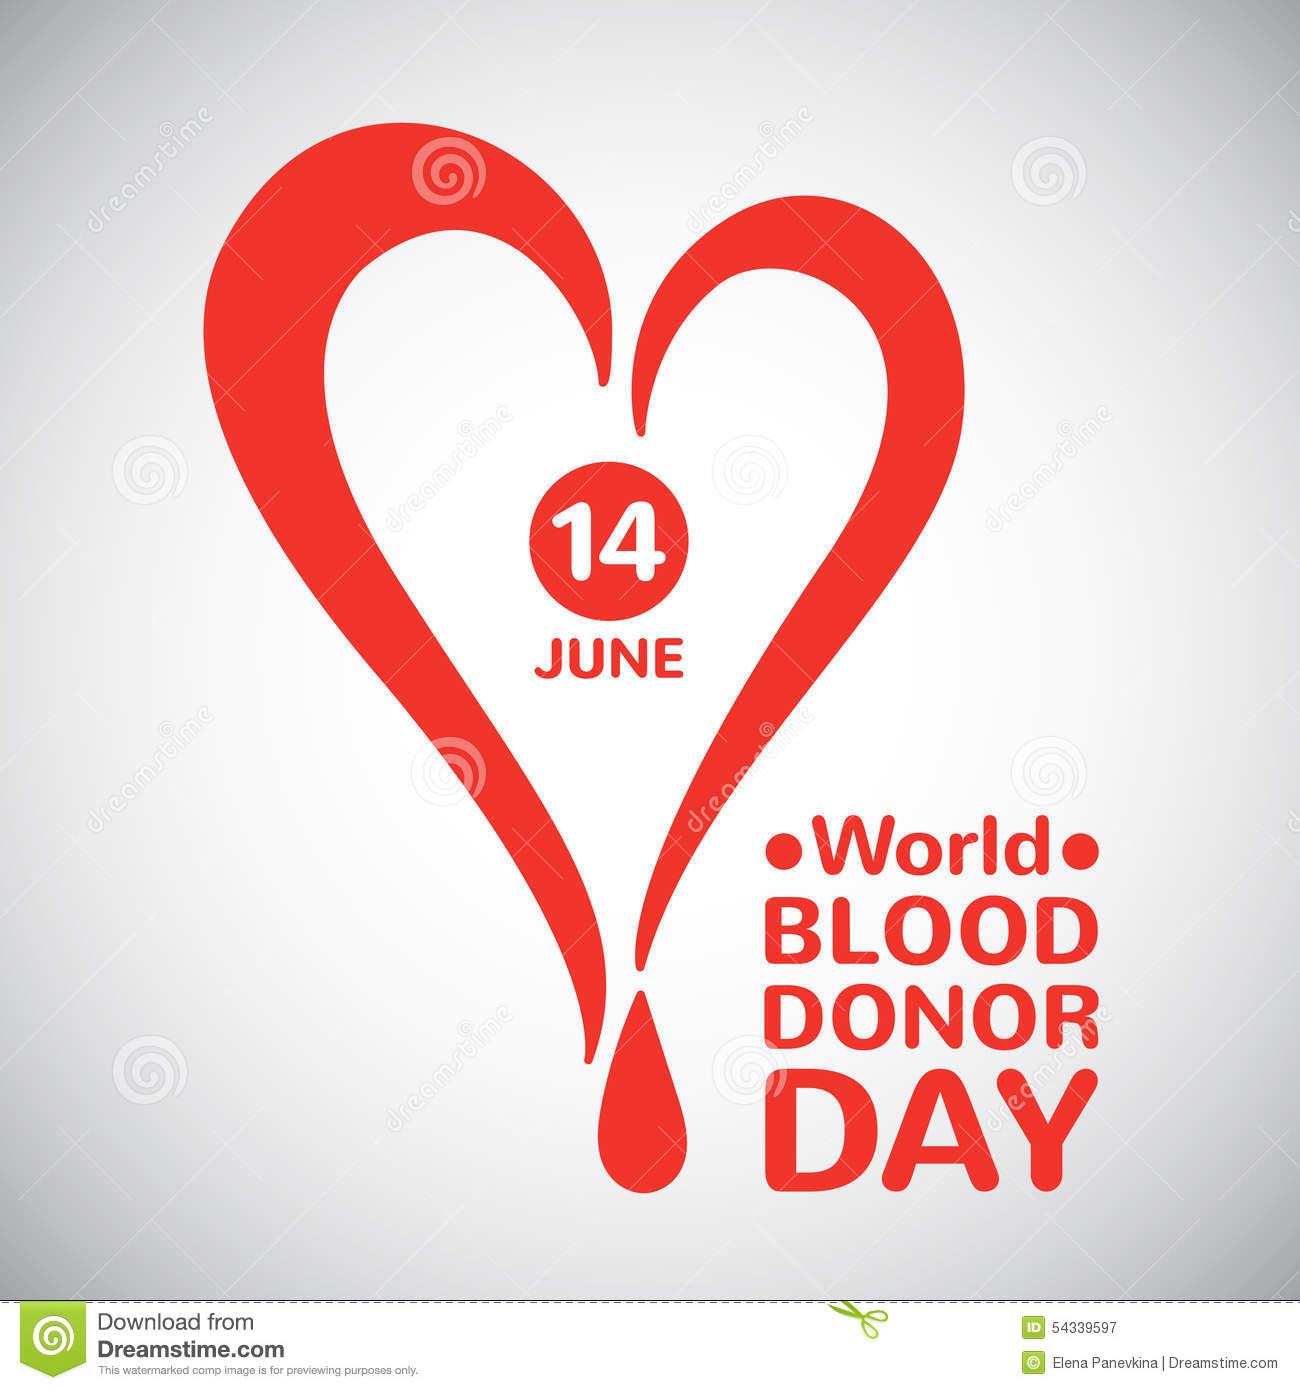 14 June World Blood Donor Day